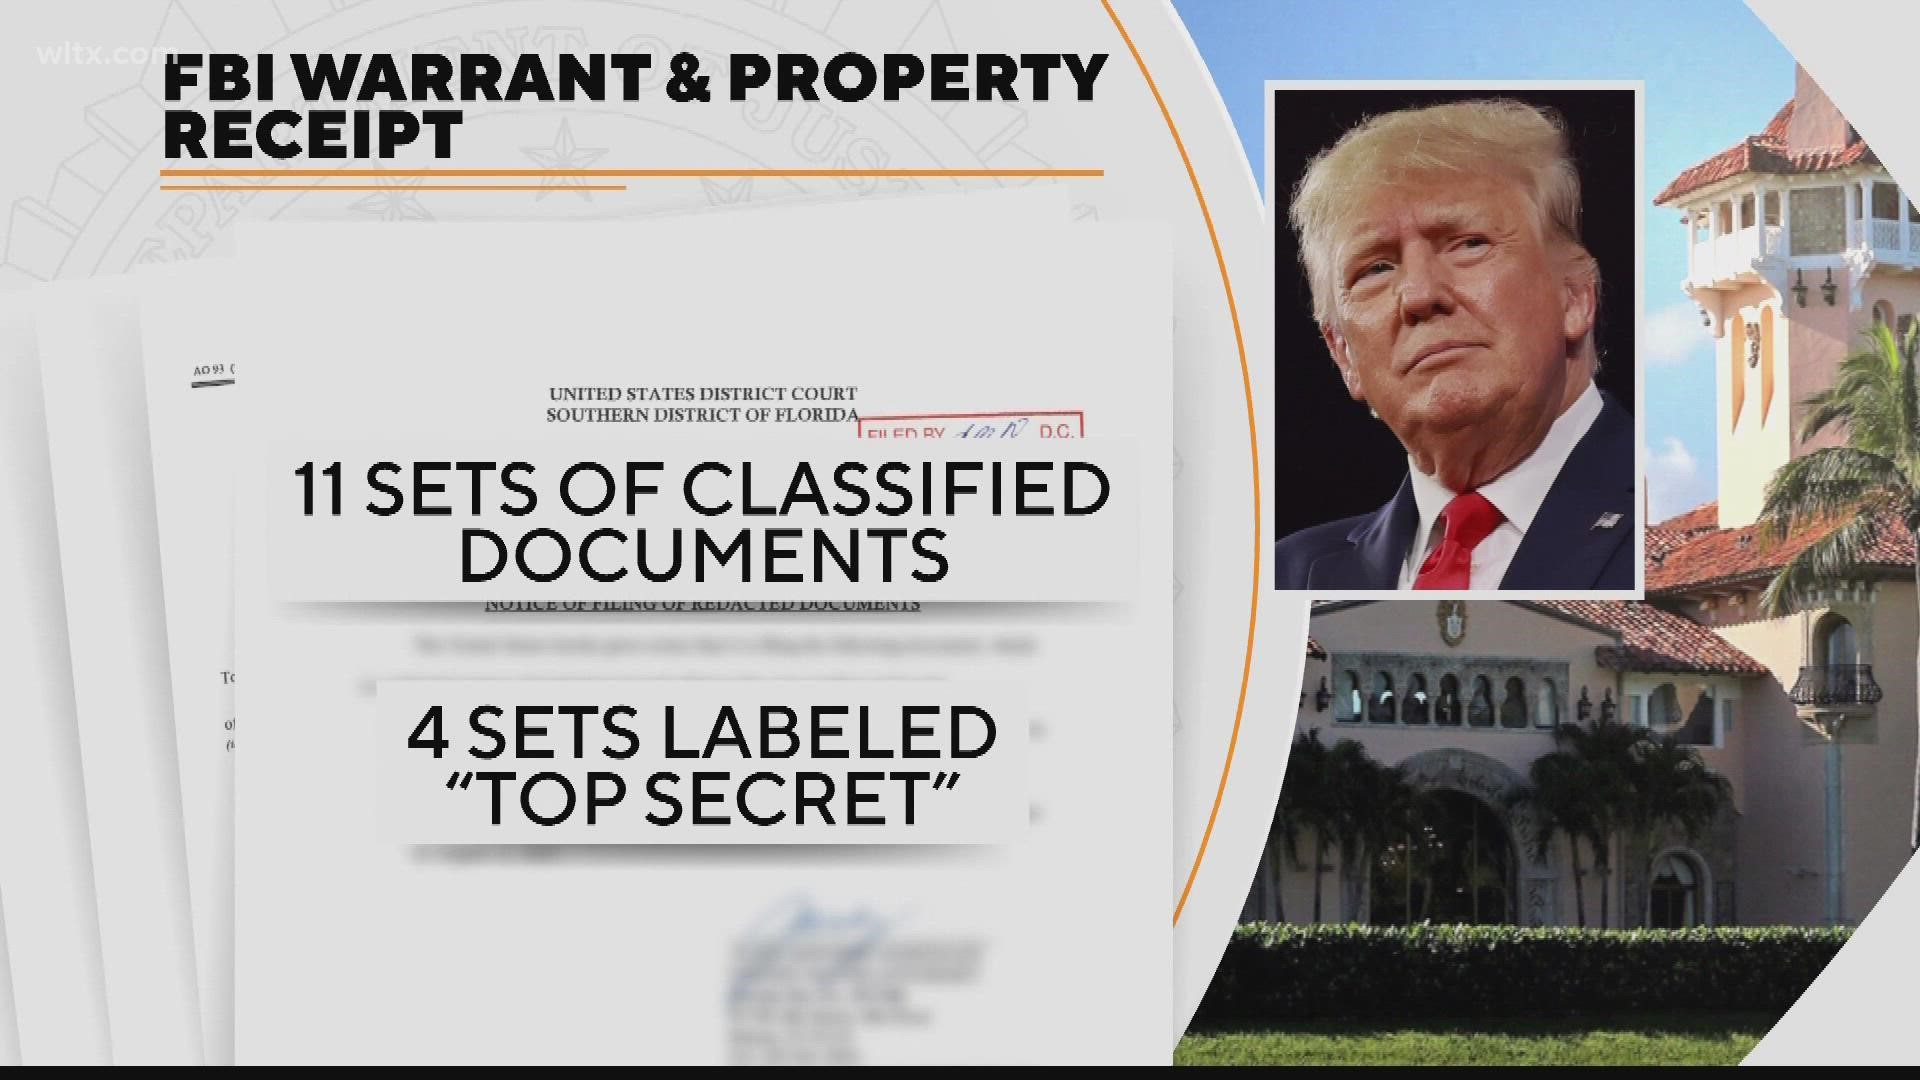 In a new lawsuit, former President Trump has filed a motion asking that a special master be named to review the documents seized by the FBI at his Mar-a-Lago home.